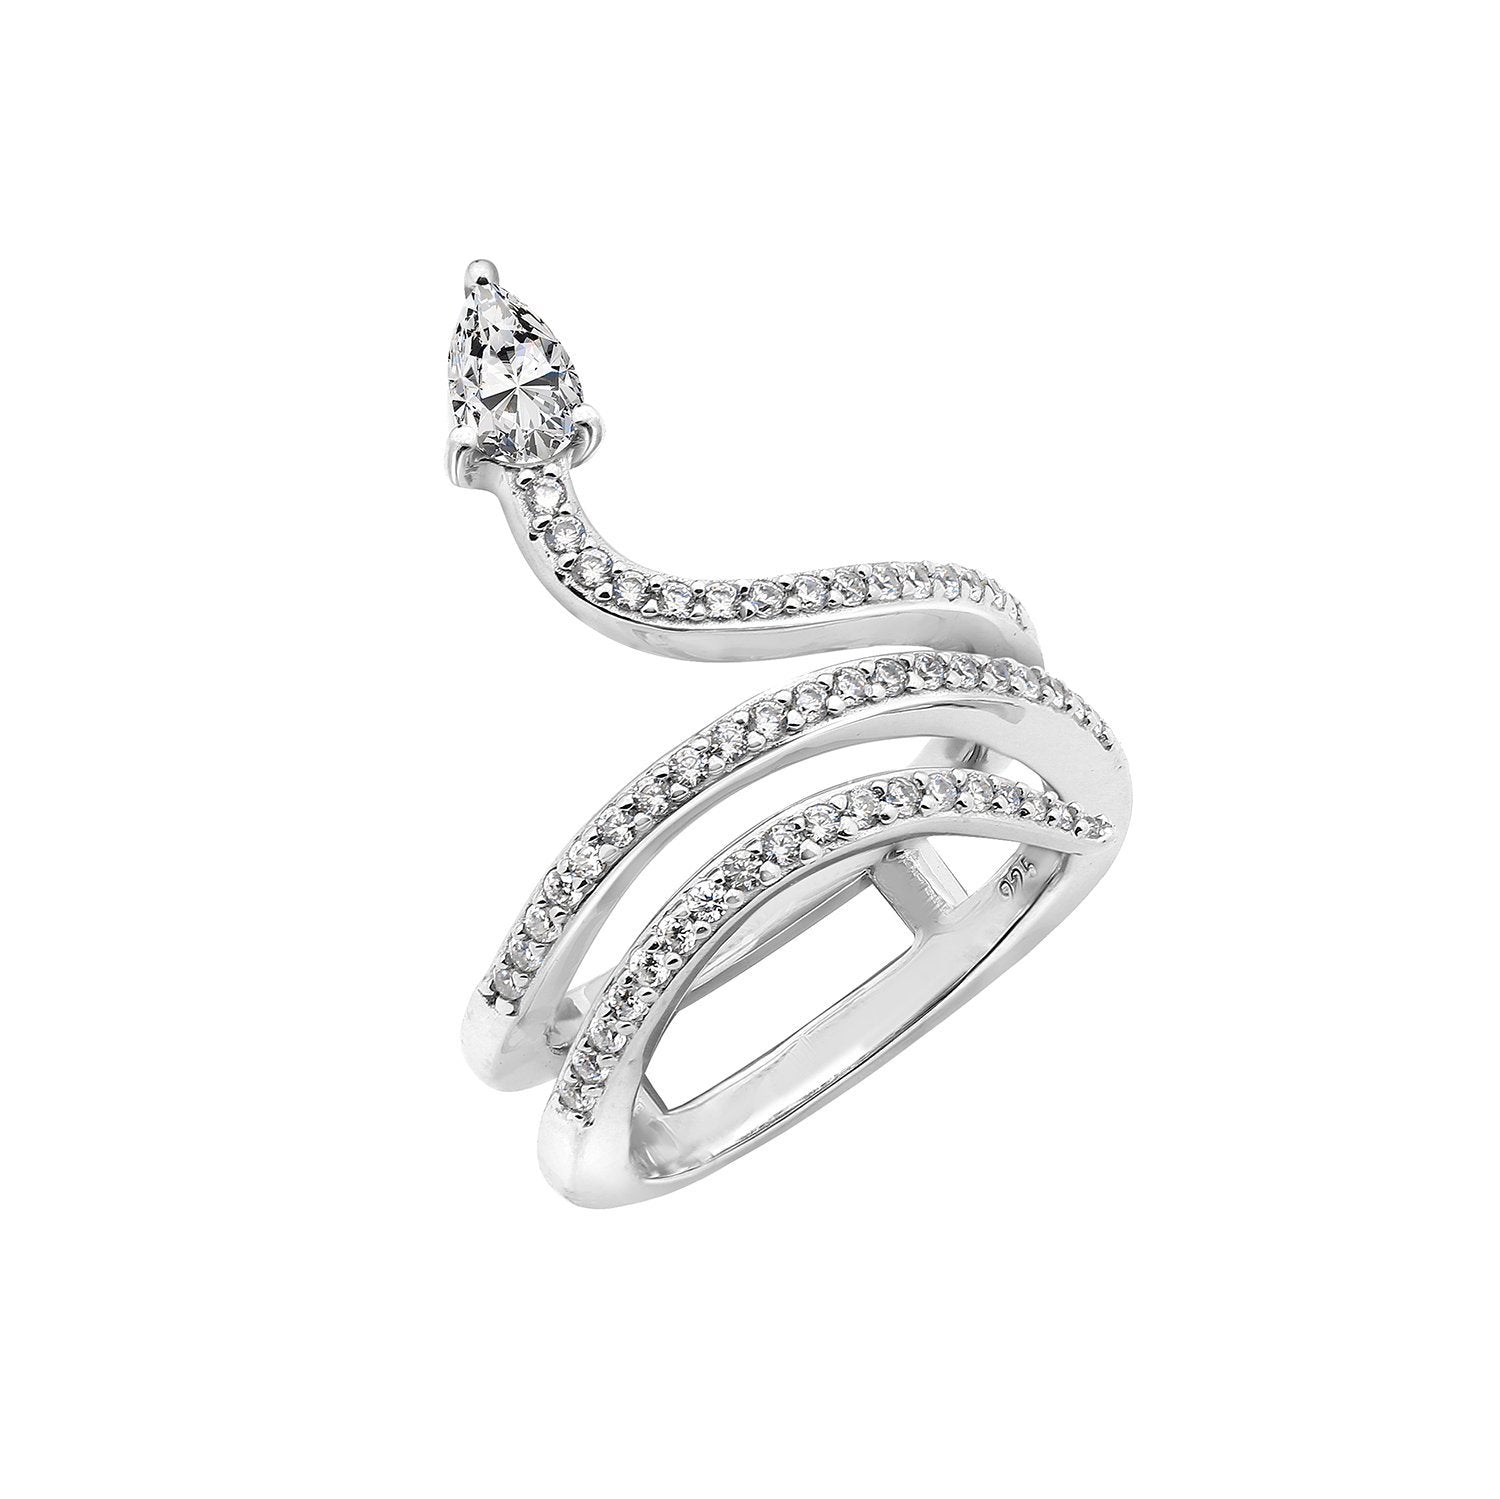 KIERA NEW YORK Sterling Silver Cubic Zirconia Coiled Snake Ring